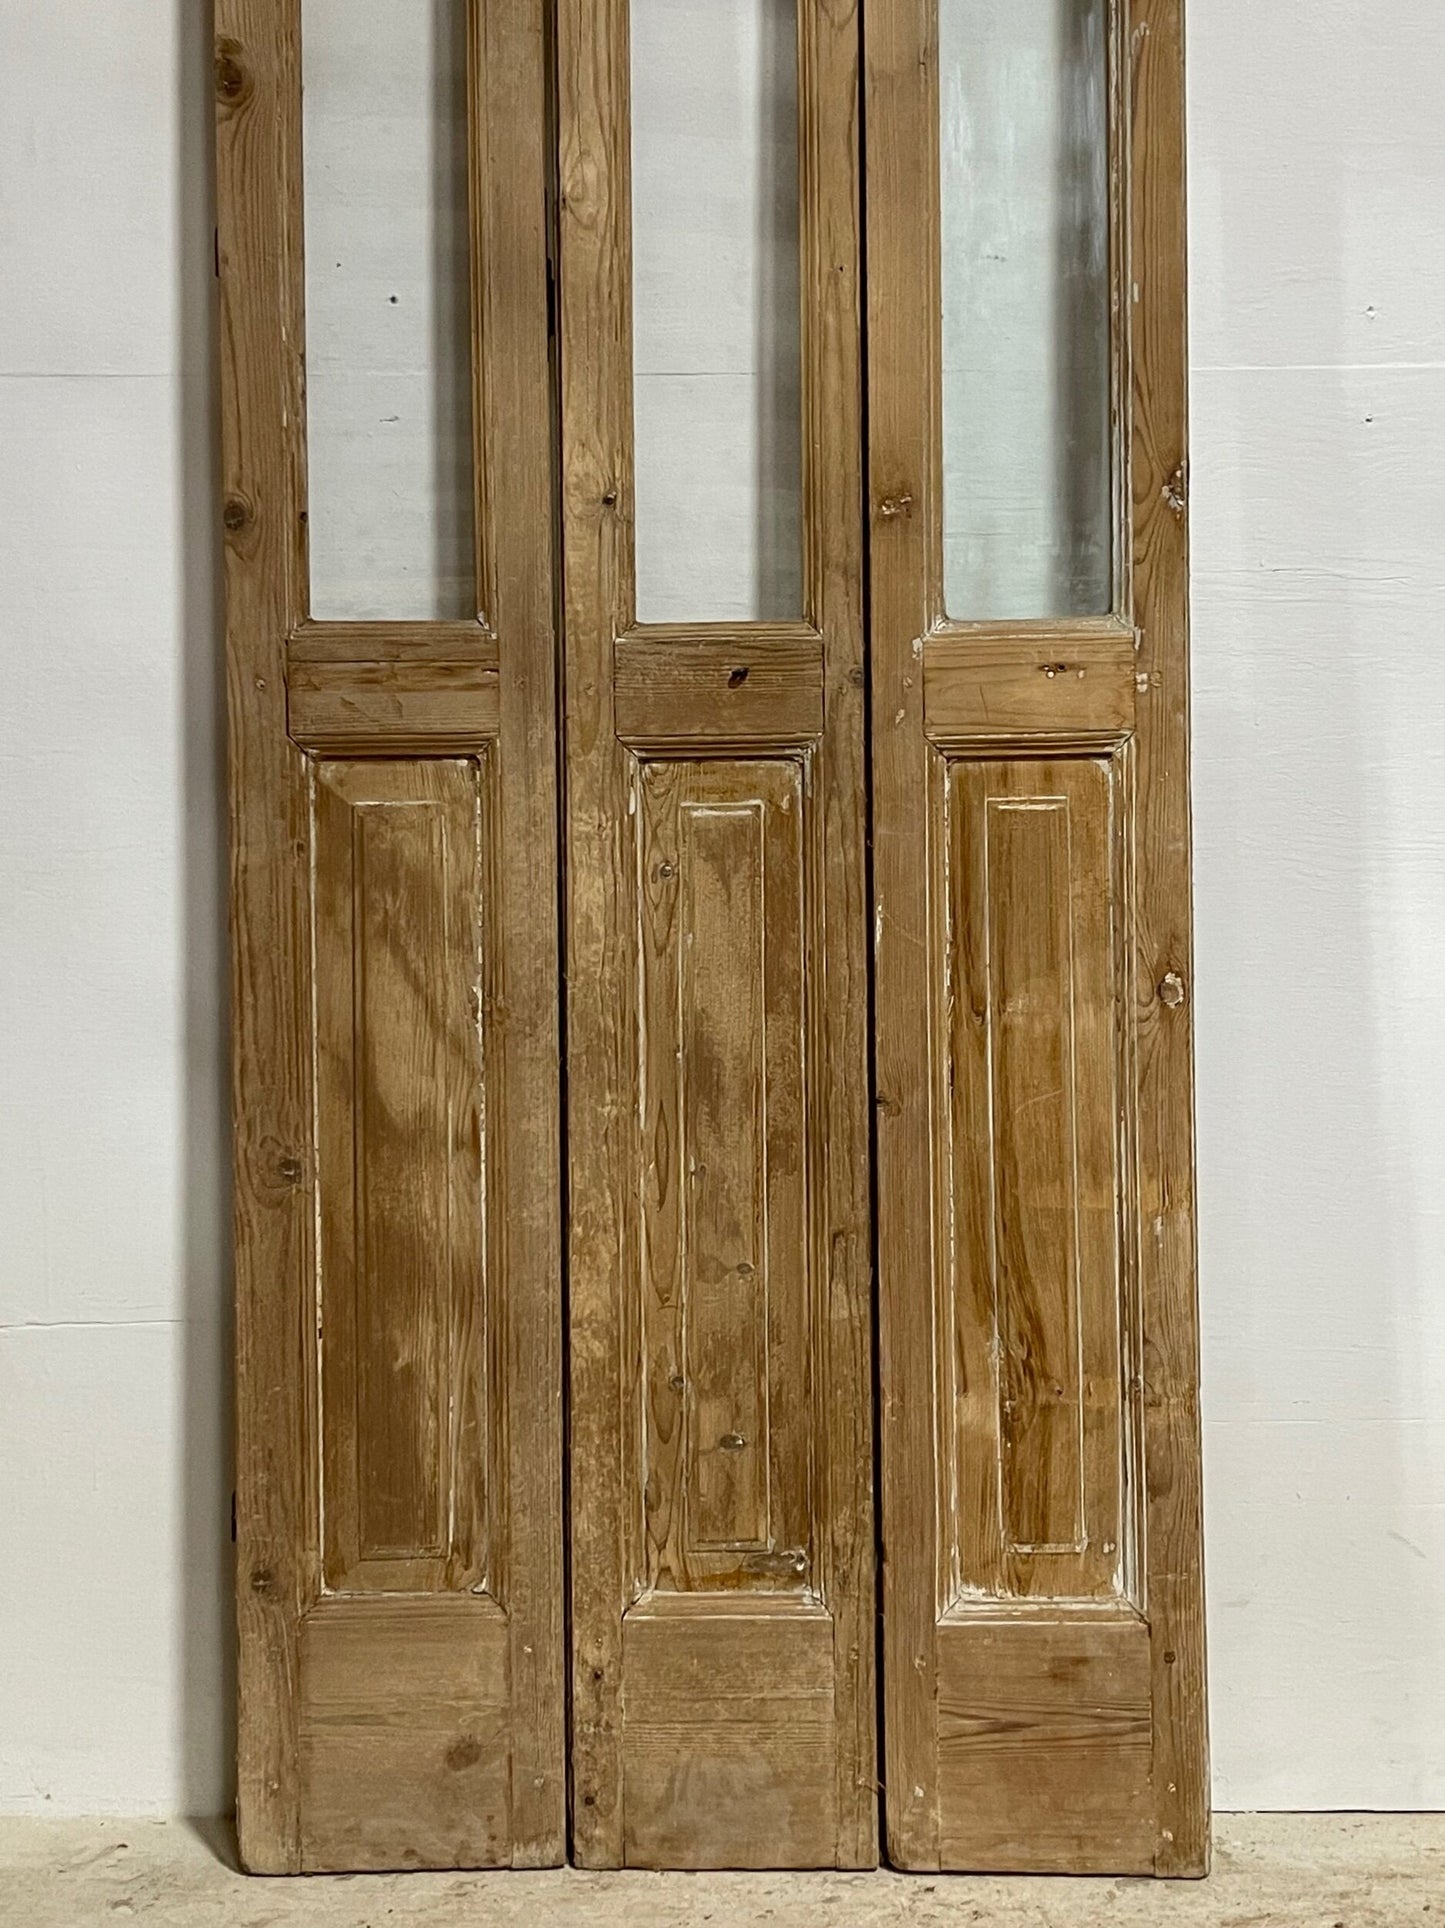 Antique French doors with glass (96.25x30.25) H0255s